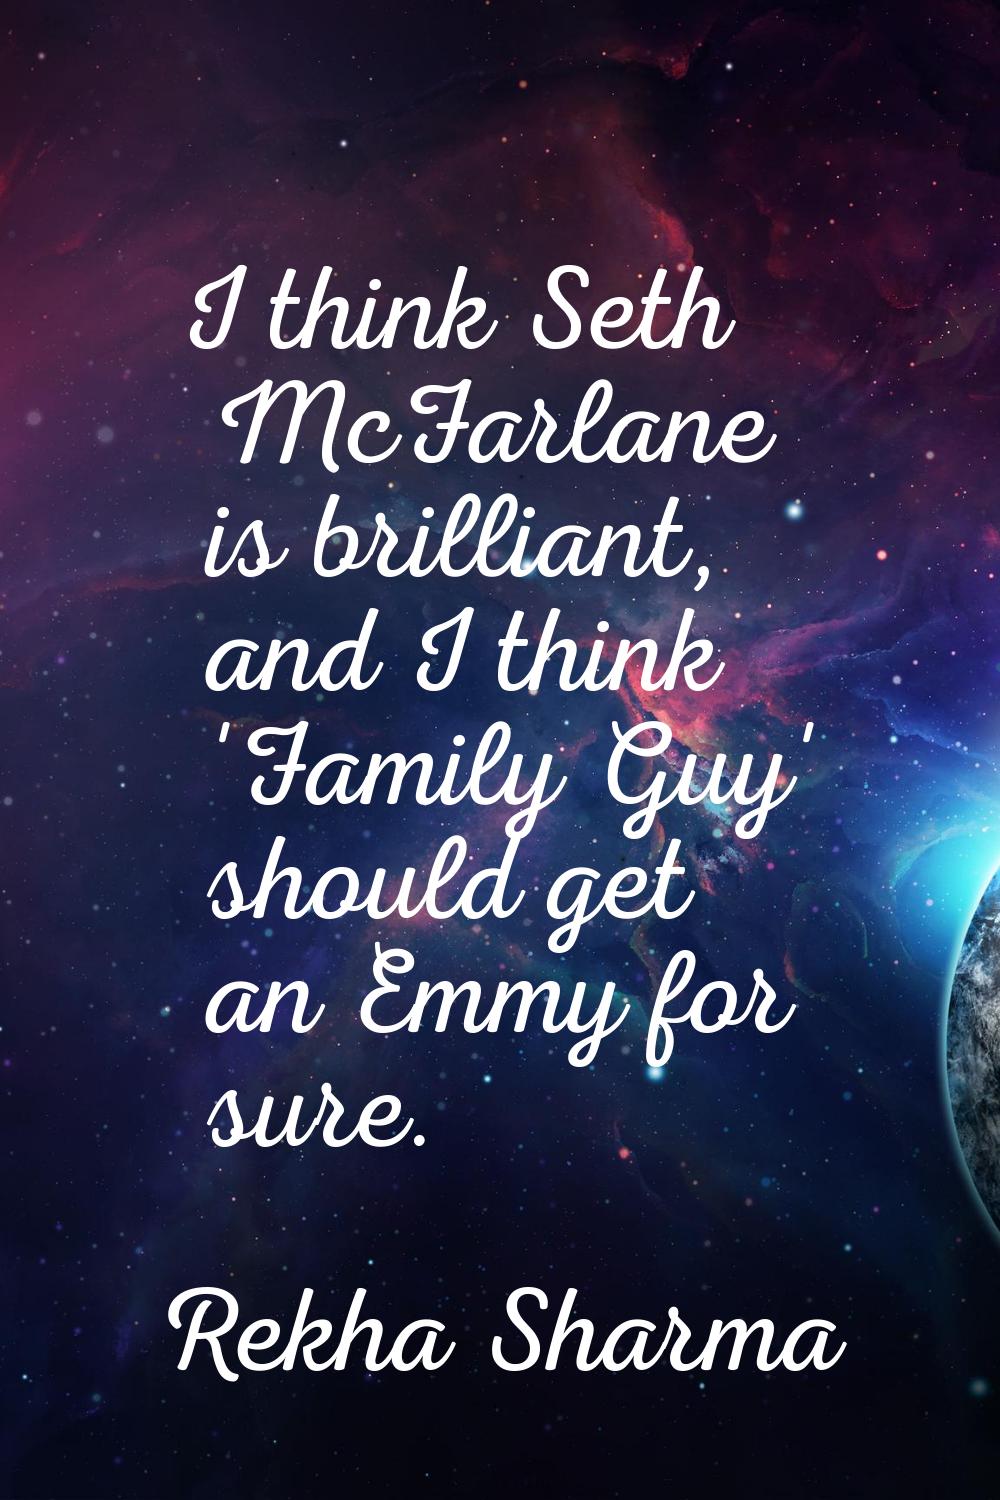 I think Seth McFarlane is brilliant, and I think 'Family Guy' should get an Emmy for sure.